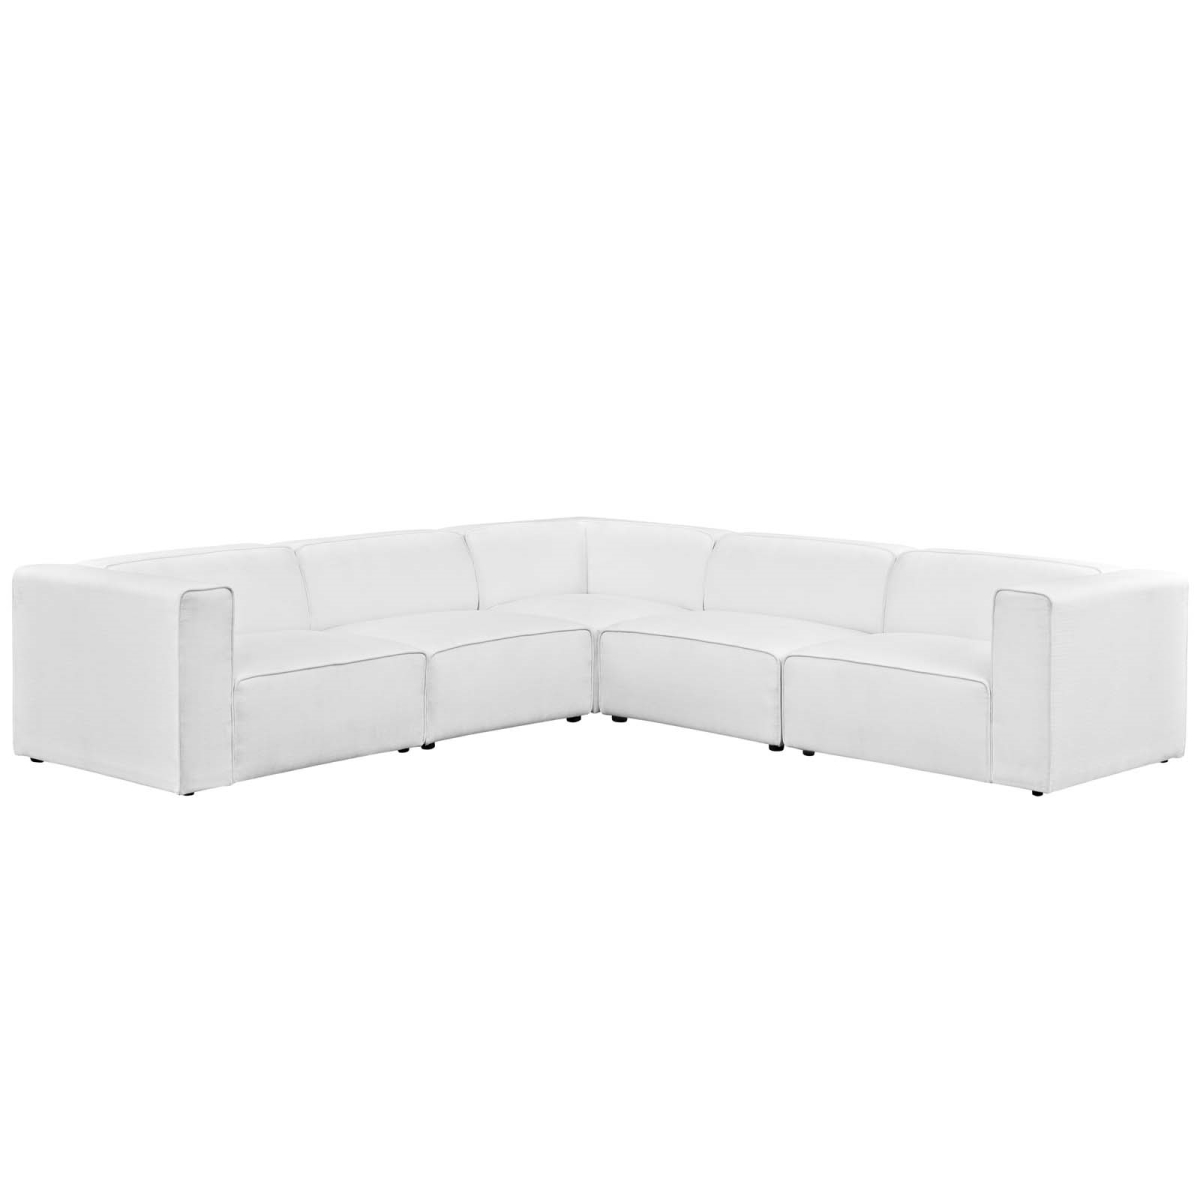 Eei-2835-whi 5 Piece Mingle Upholstered Fabric Sectional Sofa Set - White, 27 X 115 X 115 In.